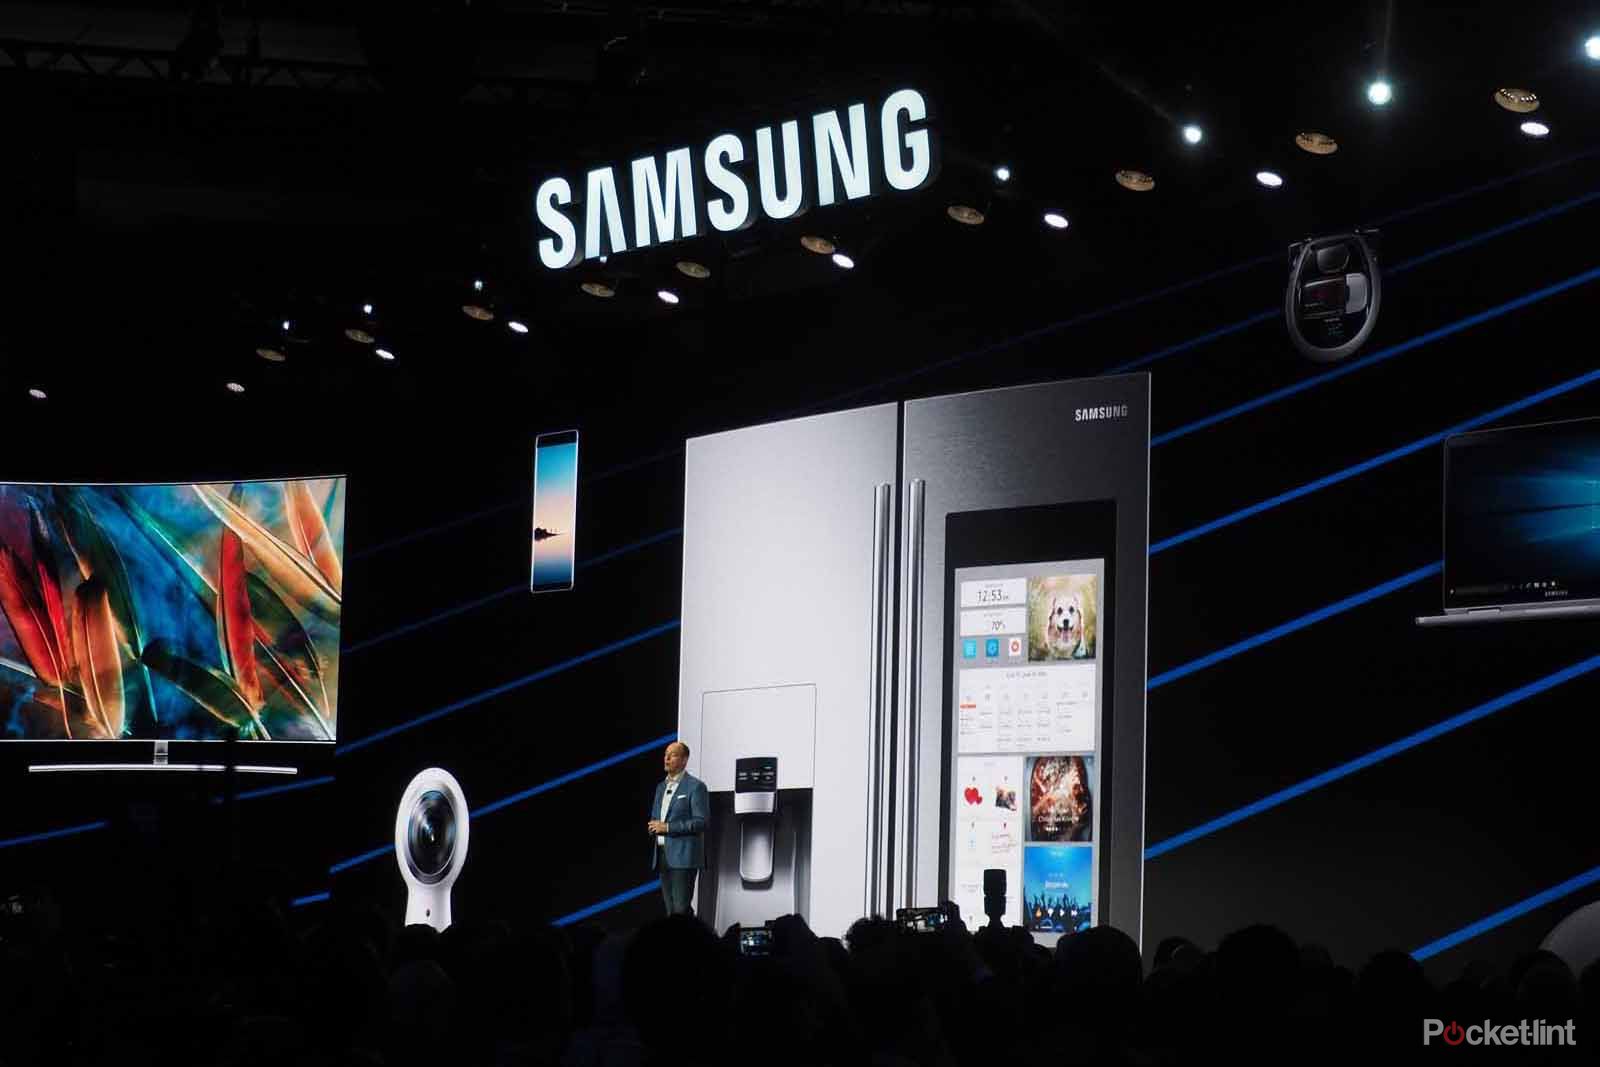 Samsung All our devices will be connected and intelligent by 2020 image 7